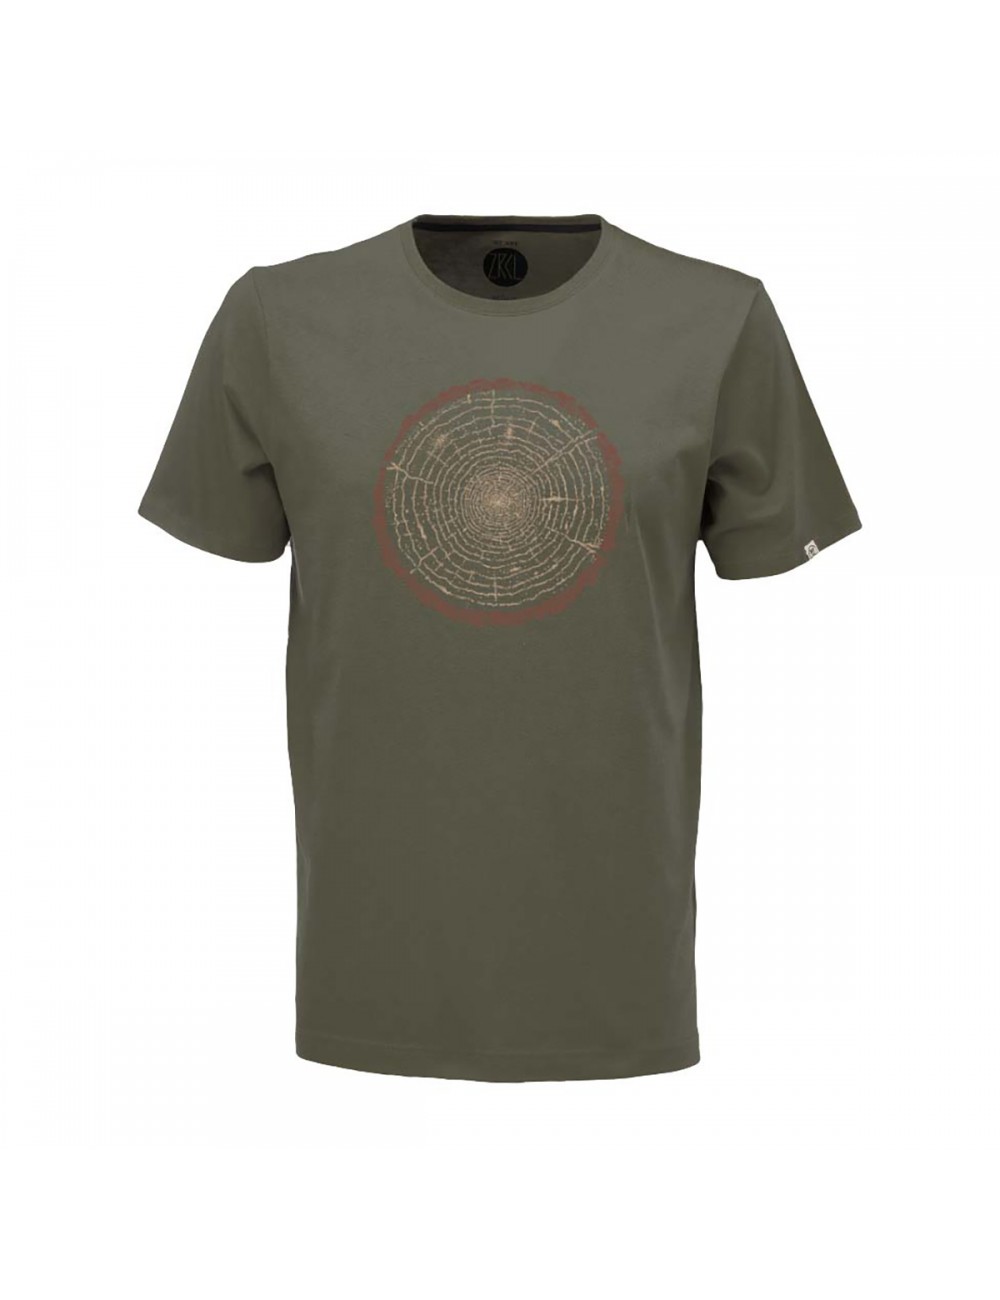 ZRCL T-Shirt Tree Ring - Olive